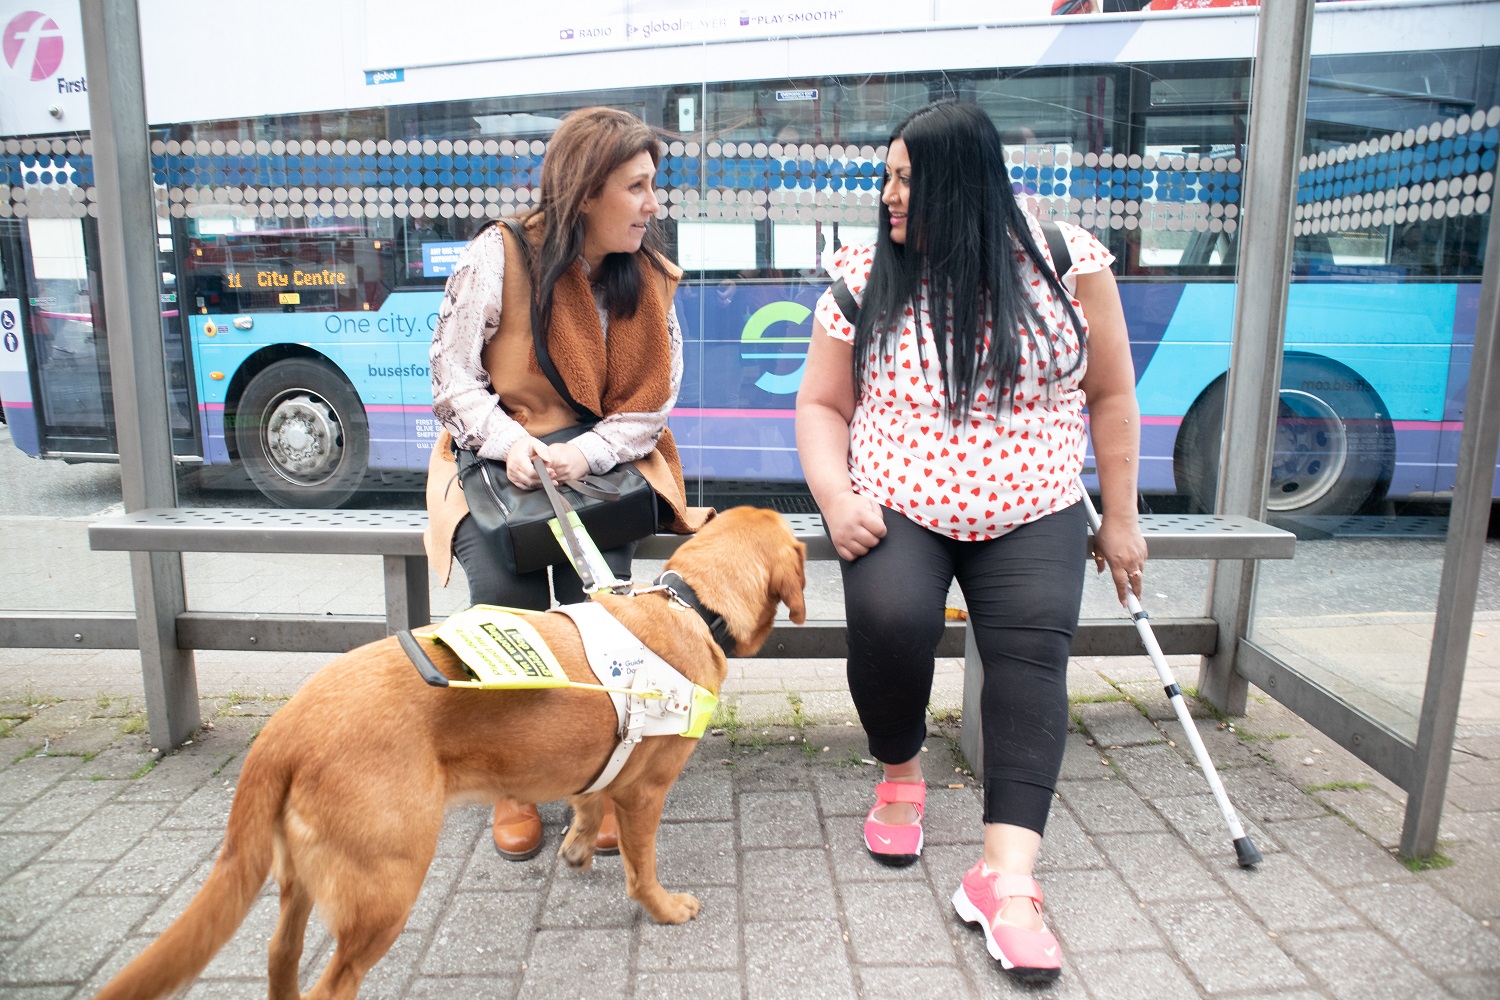 An image of two people sat at a bus stop. There is a bus behind the stand. One of the people has a guide dog with them.